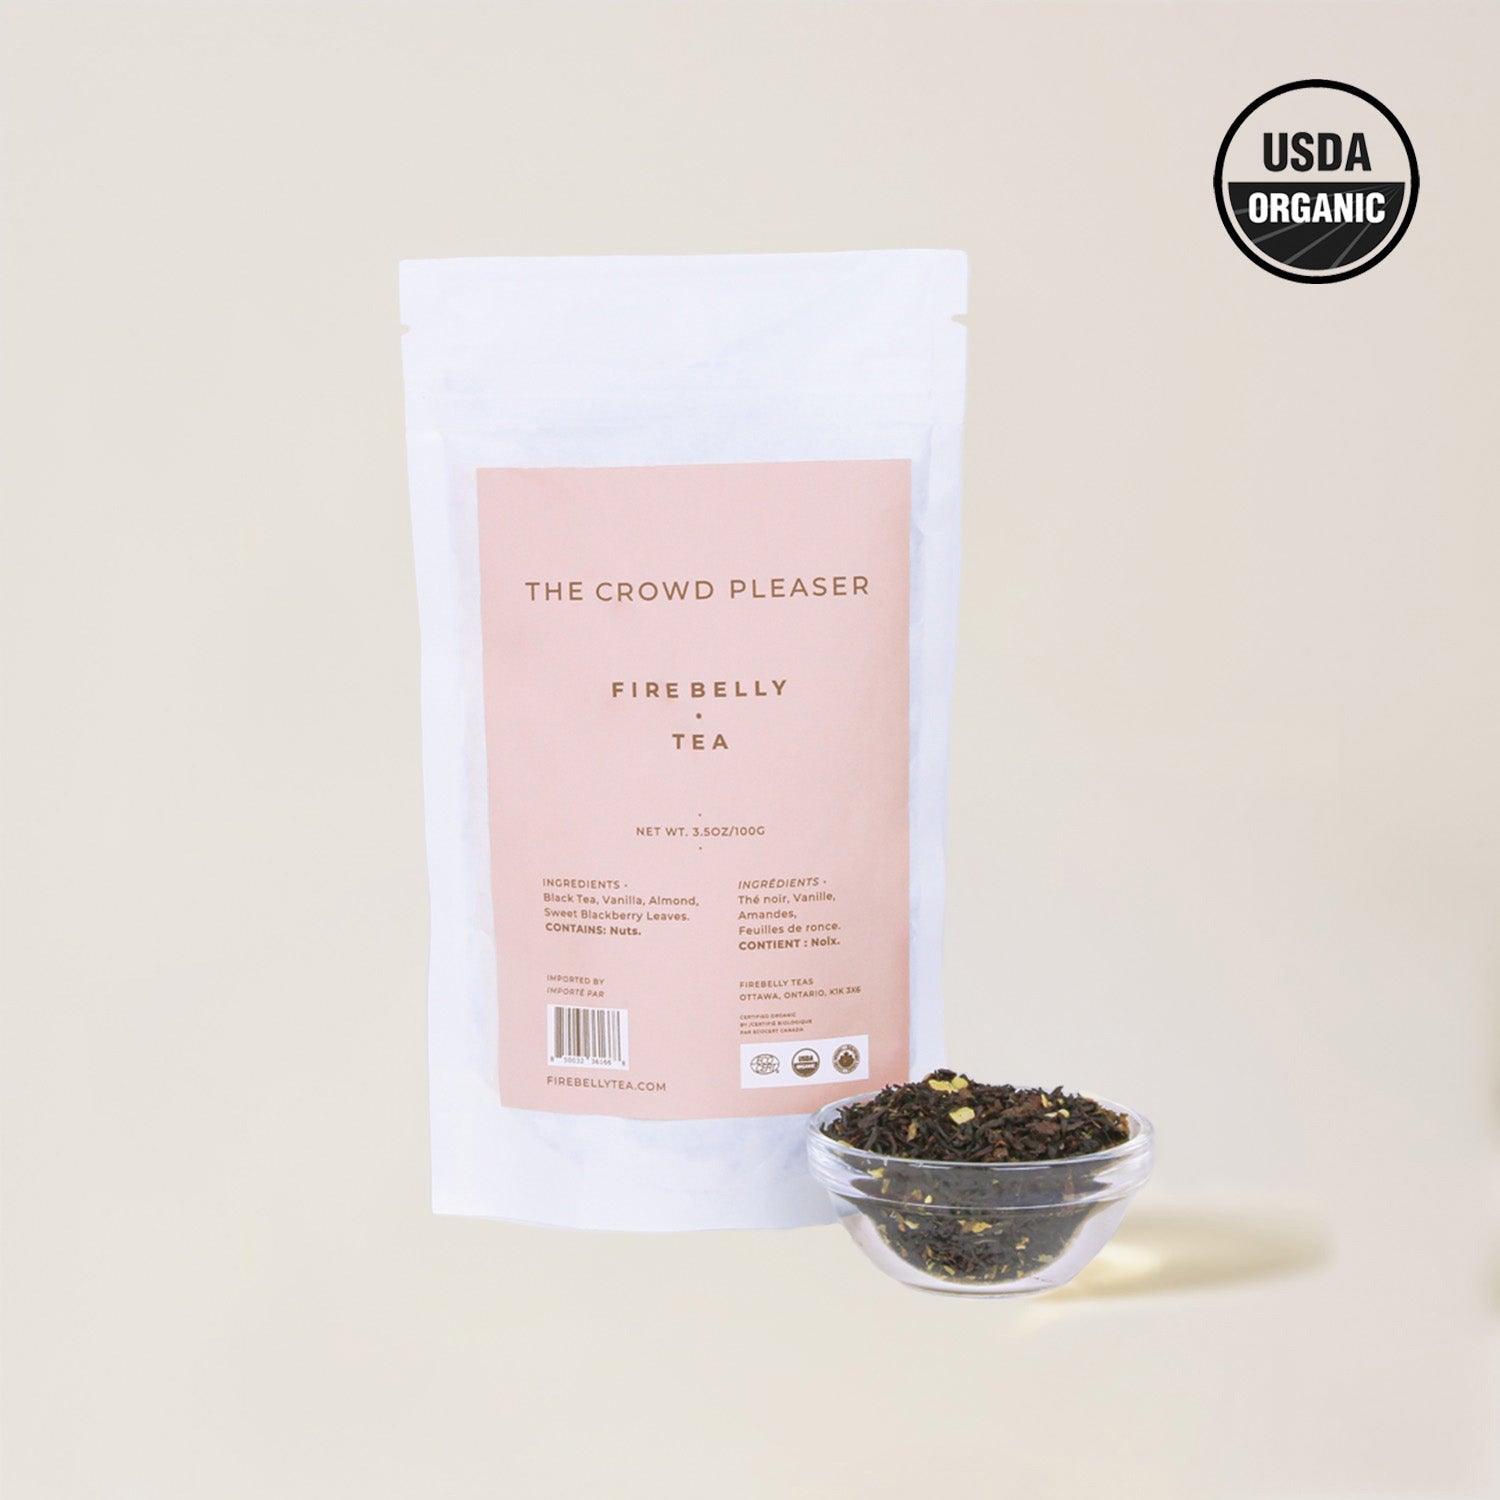 The Crowd Pleaser by Firebelly Tea